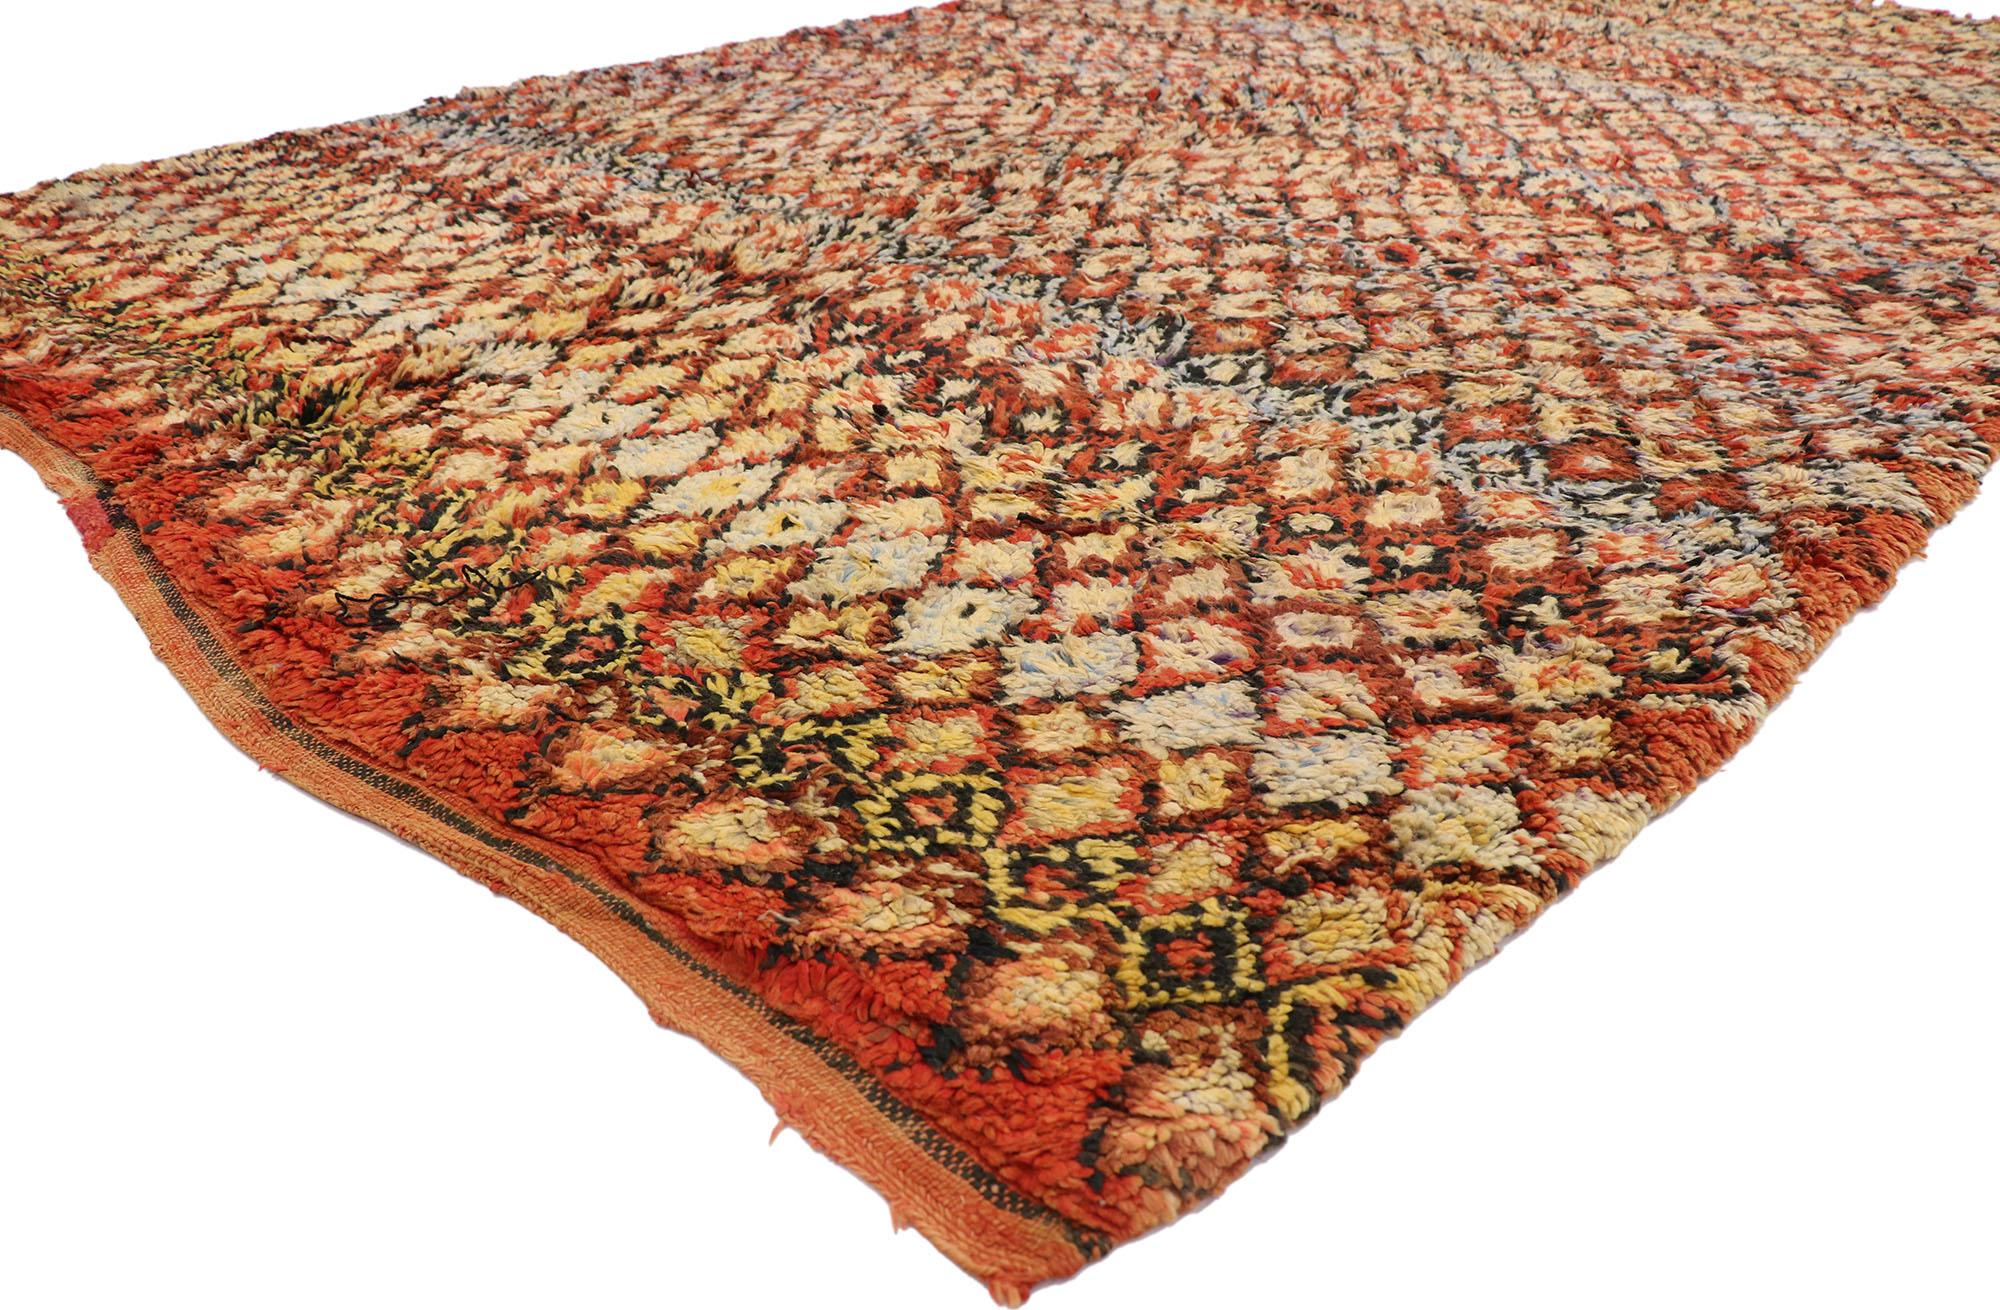 21256, vintage Berber Boujad Moroccan rug with Mid-Century Modern style. Showcasing a bold expressive design, incredible detail and texture, this hand knotted wool vintage Berber Boujad Moroccan rug is a captivating vision of woven beauty. The